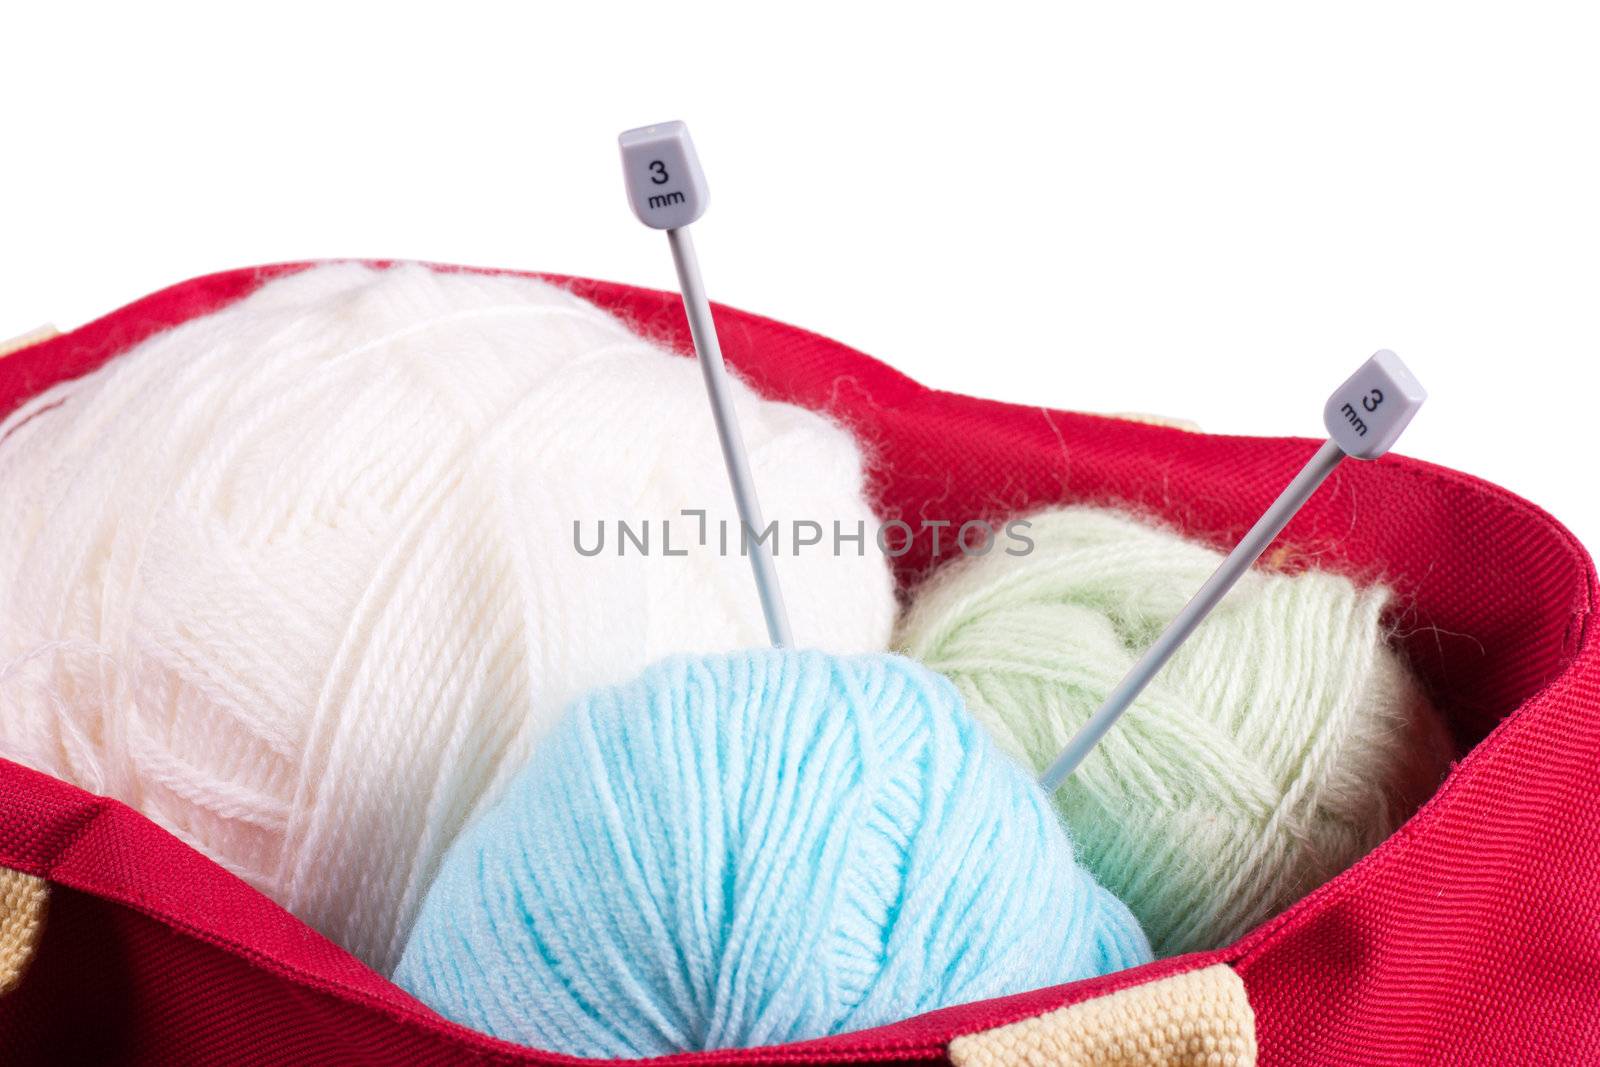 Blue, white and green wool balls in a red bag